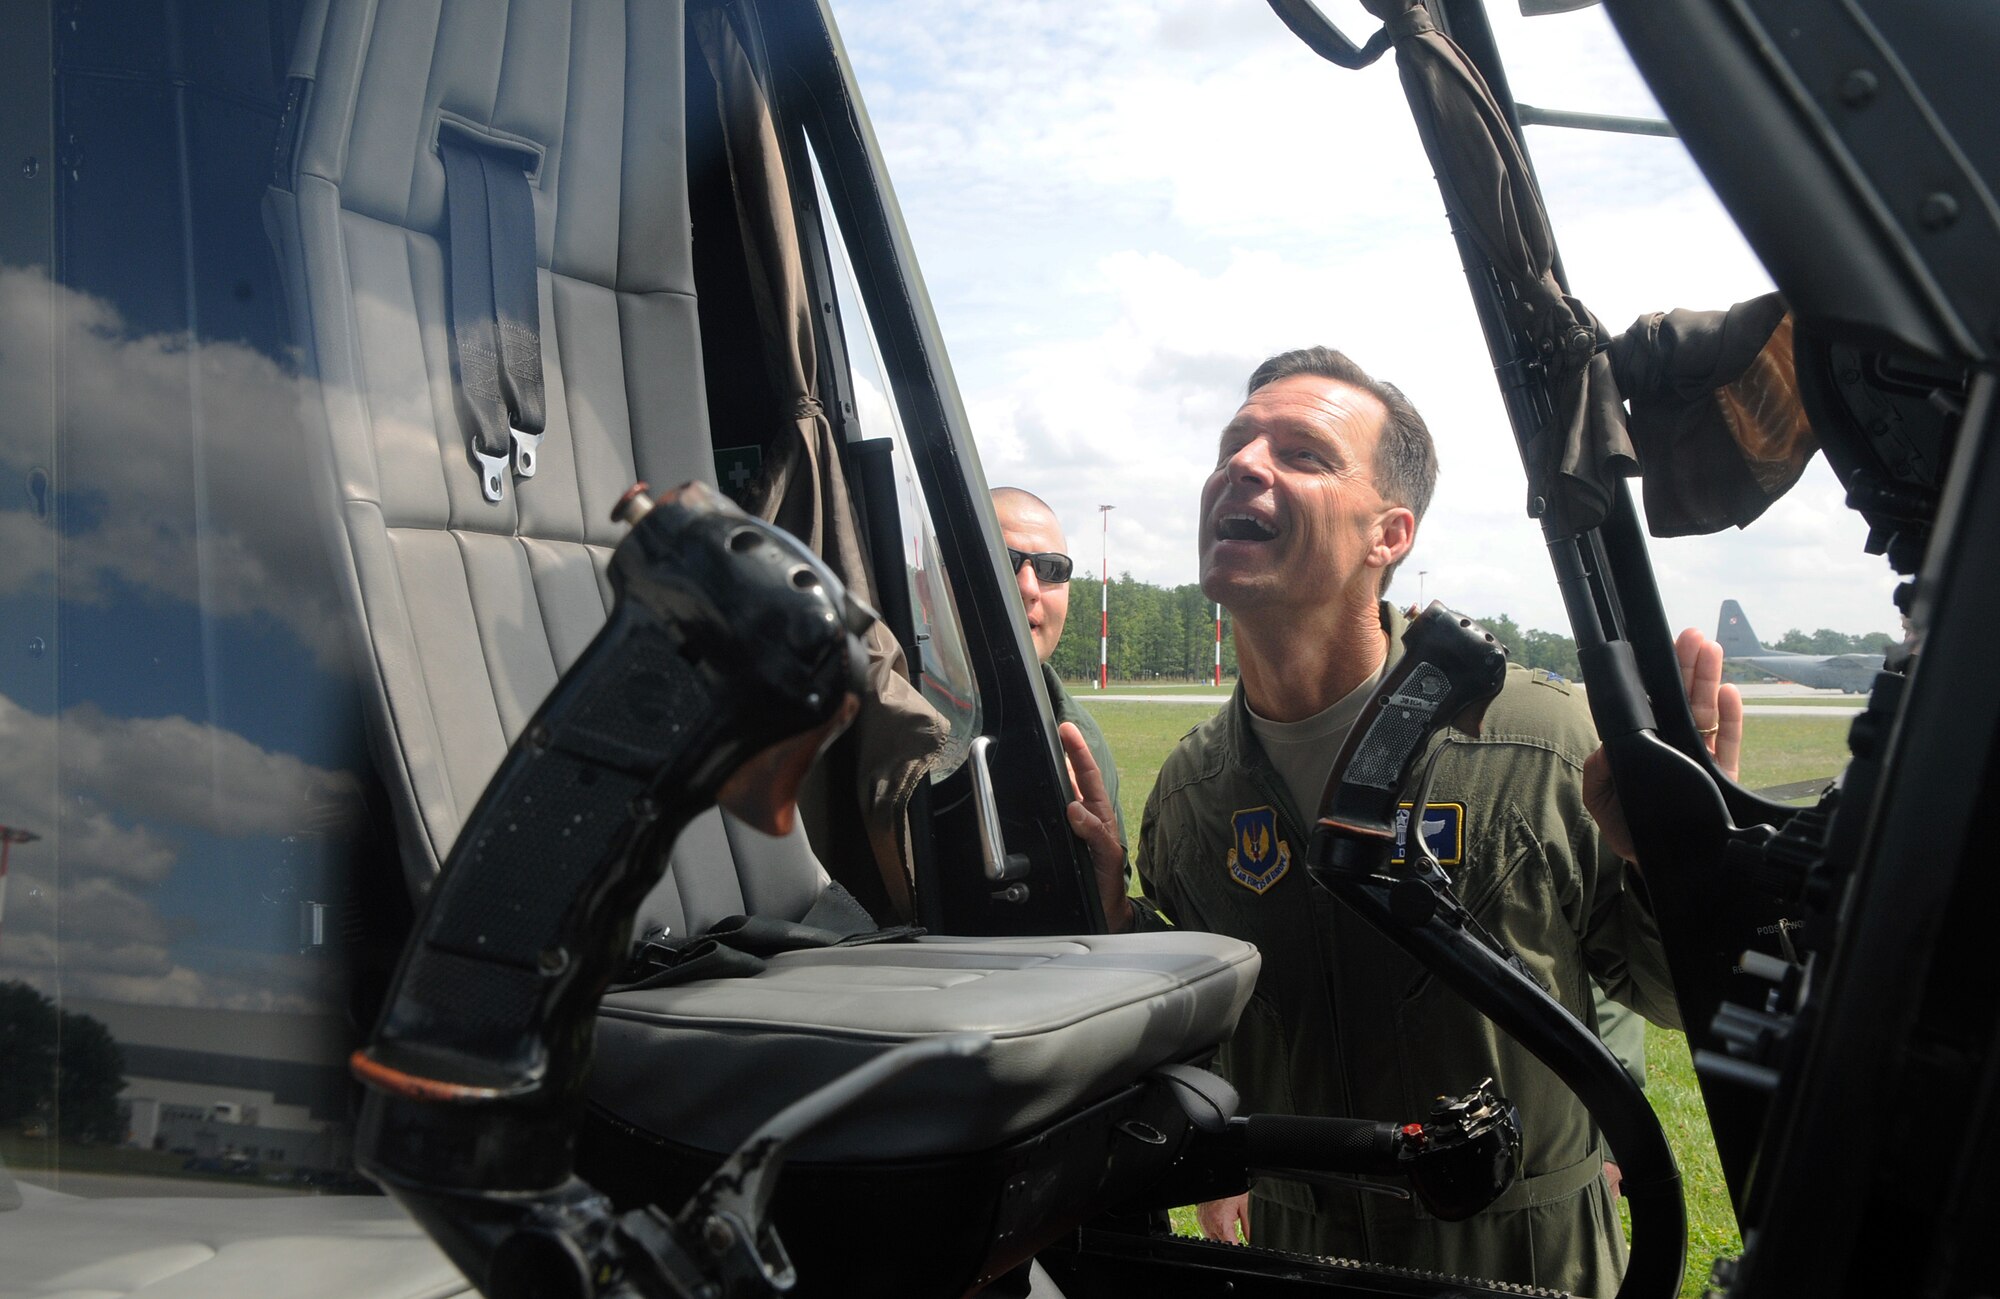 Brig. Gen. Mark Dillon, 86th Airlift Wing commander, admires the inside of a Polish air force Mi-series helicopter during a visit to Powidz Air Base, Poland, July 26, 2011. Dillon made his annual visit to Powidz after signing a letter of intention last year in June. By singing the letter of intention, the 86th AW and the 3rd AW became "sister wings" in an effort to improve operational capabilities. (U.S.  Air Force photo by Staff Sgt. Tyrona Lawson). 